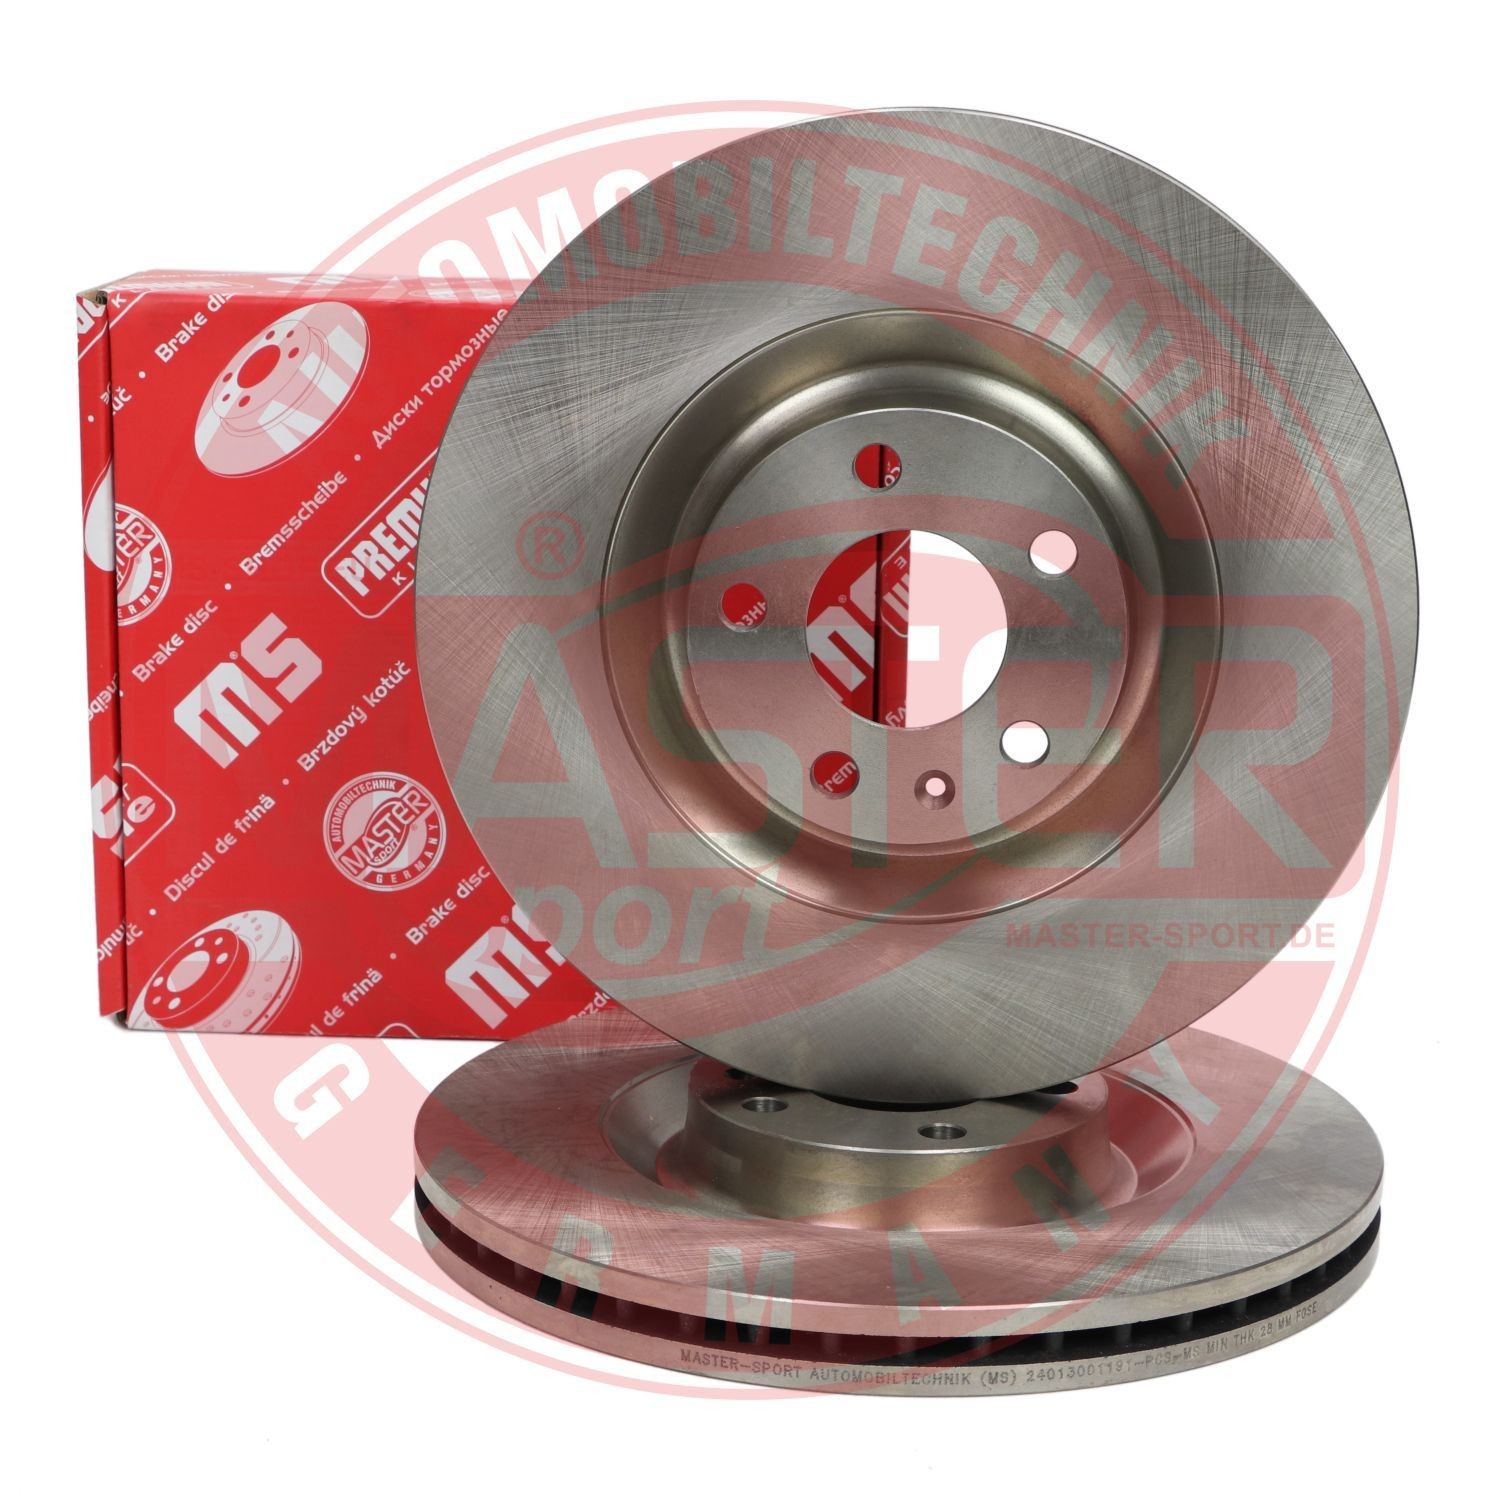 24013001191-SET-MS Brake discs BV213001191 MASTER-SPORT Front Axle, 345x30mm, 5x112, Vented, High-carbon